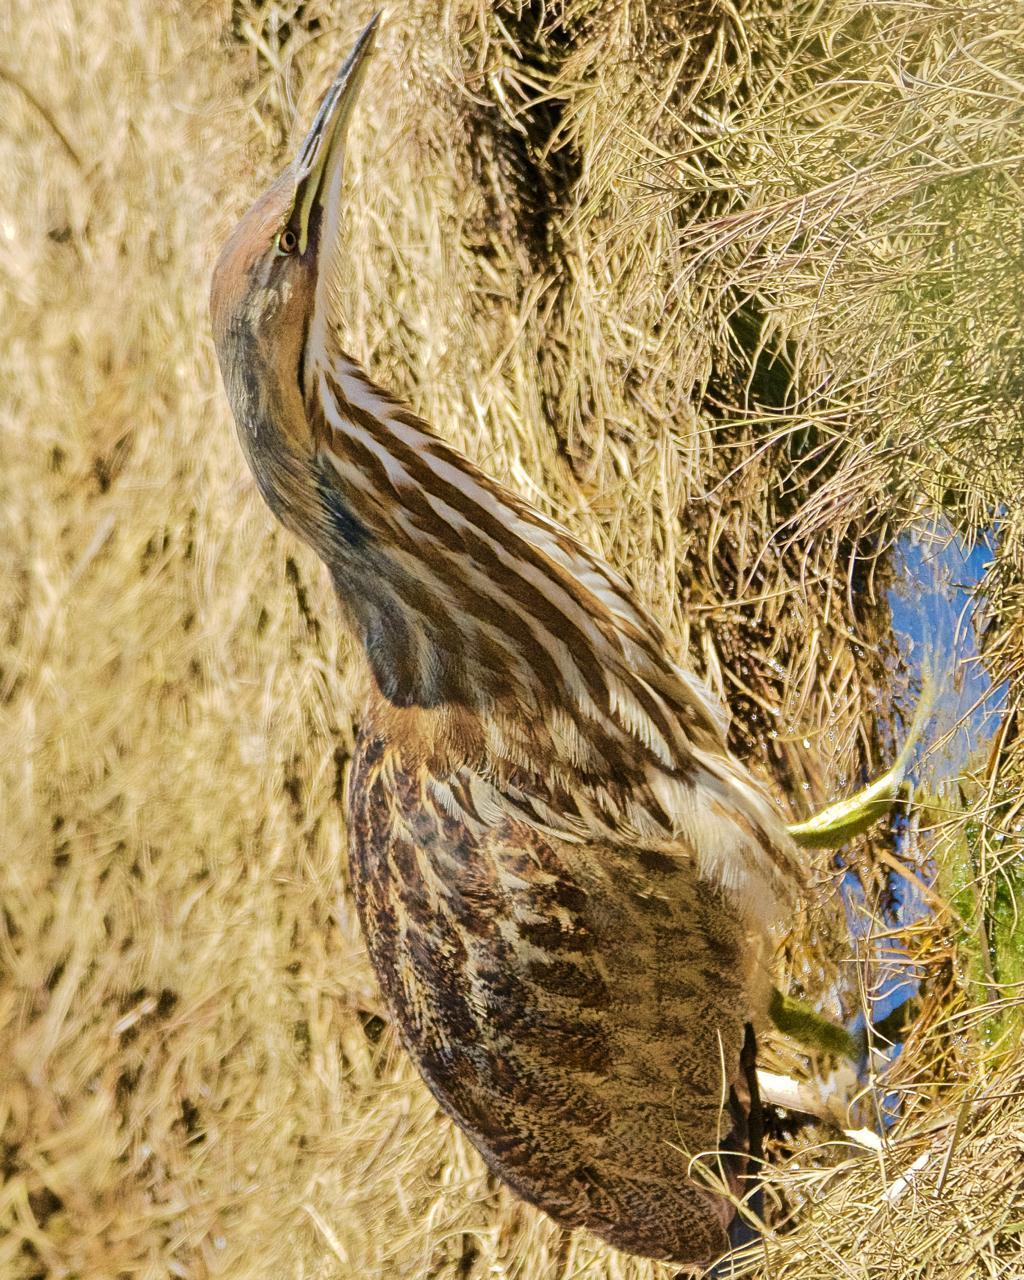 American Bittern Photo by Brian Avent